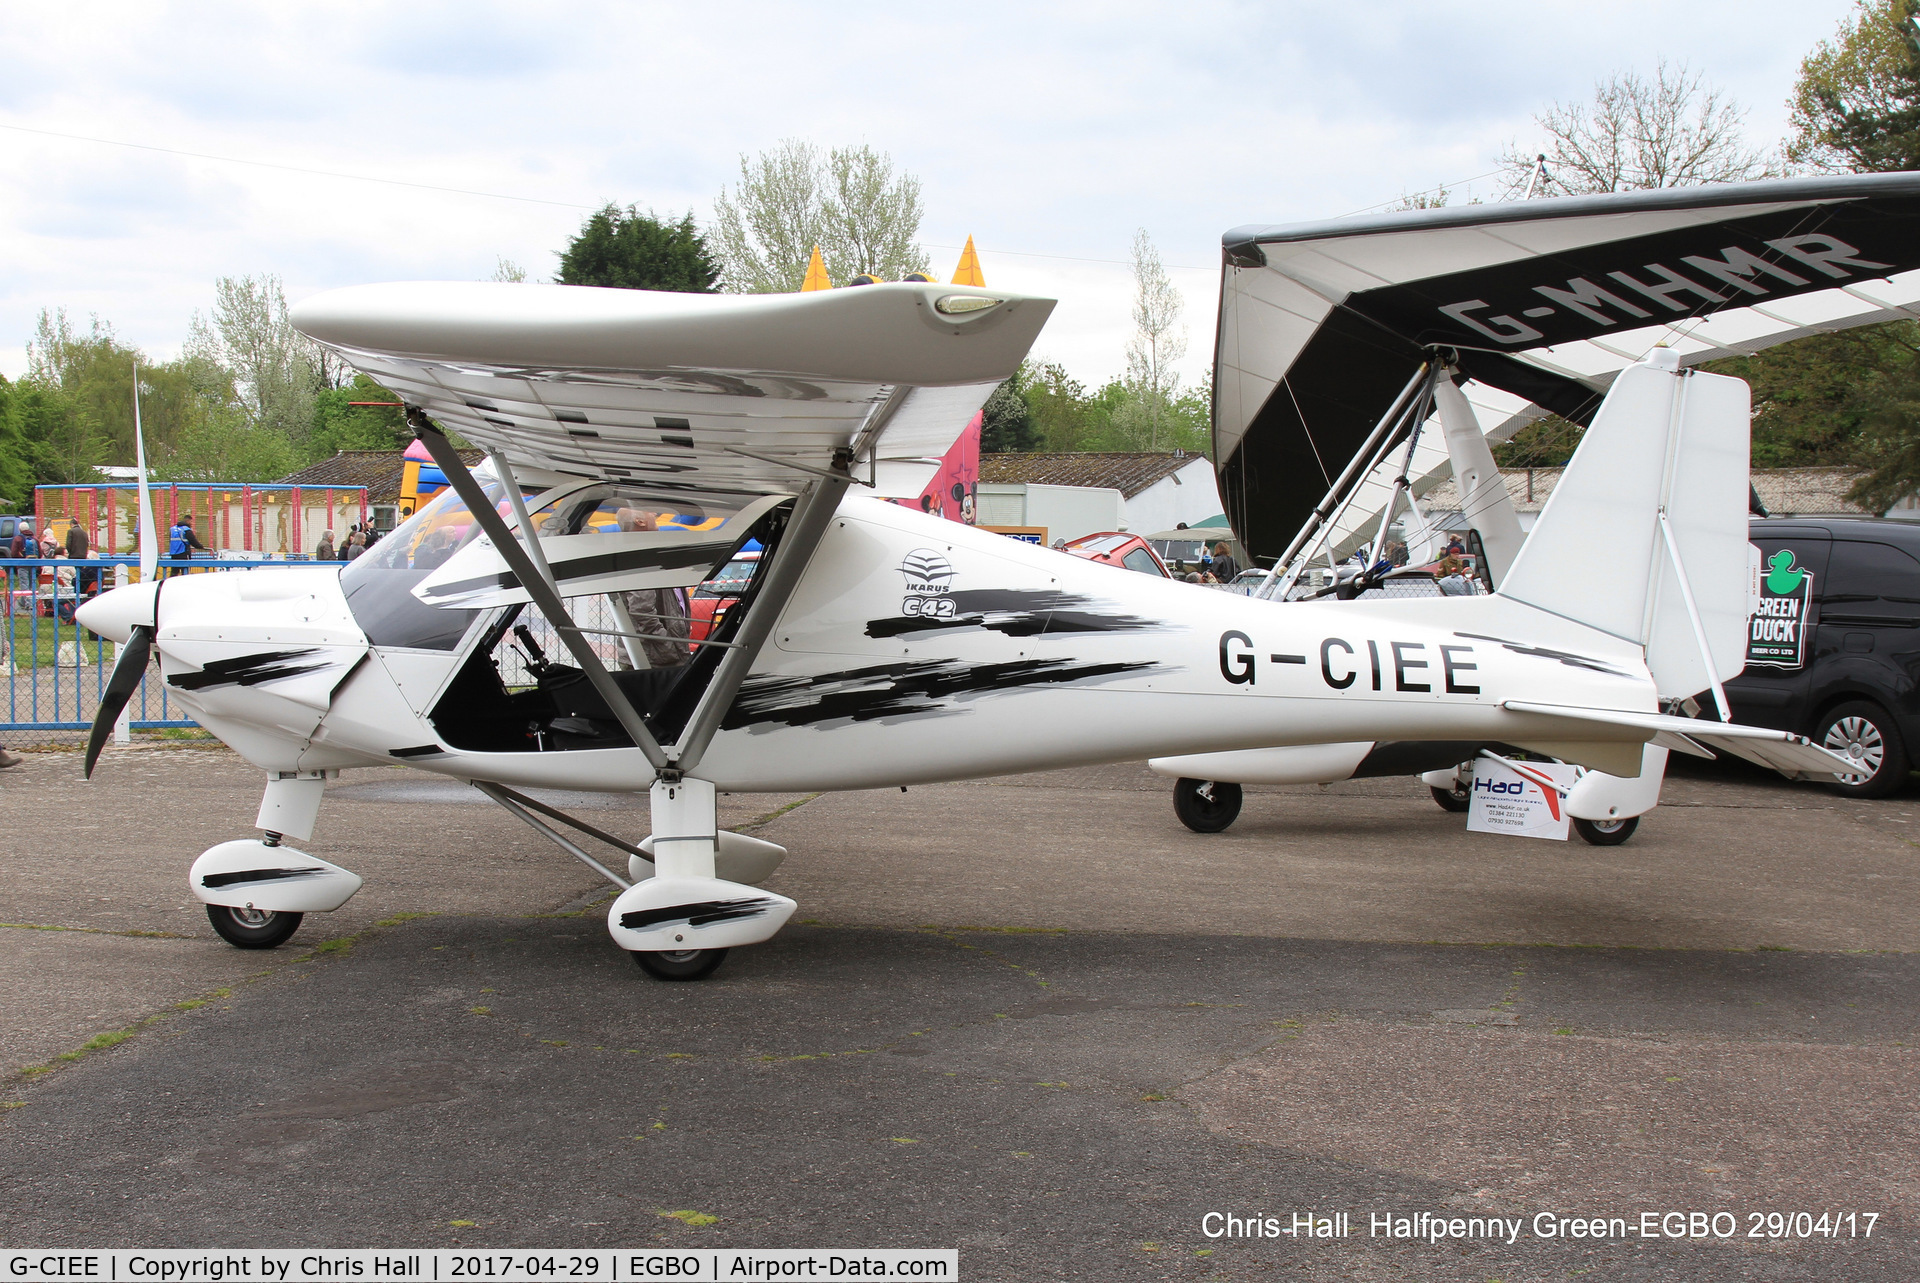 G-CIEE, 2013 Comco Ikarus C42 FB100 Bravo C/N 1311-7289, at the Radial & Trainer fly-in